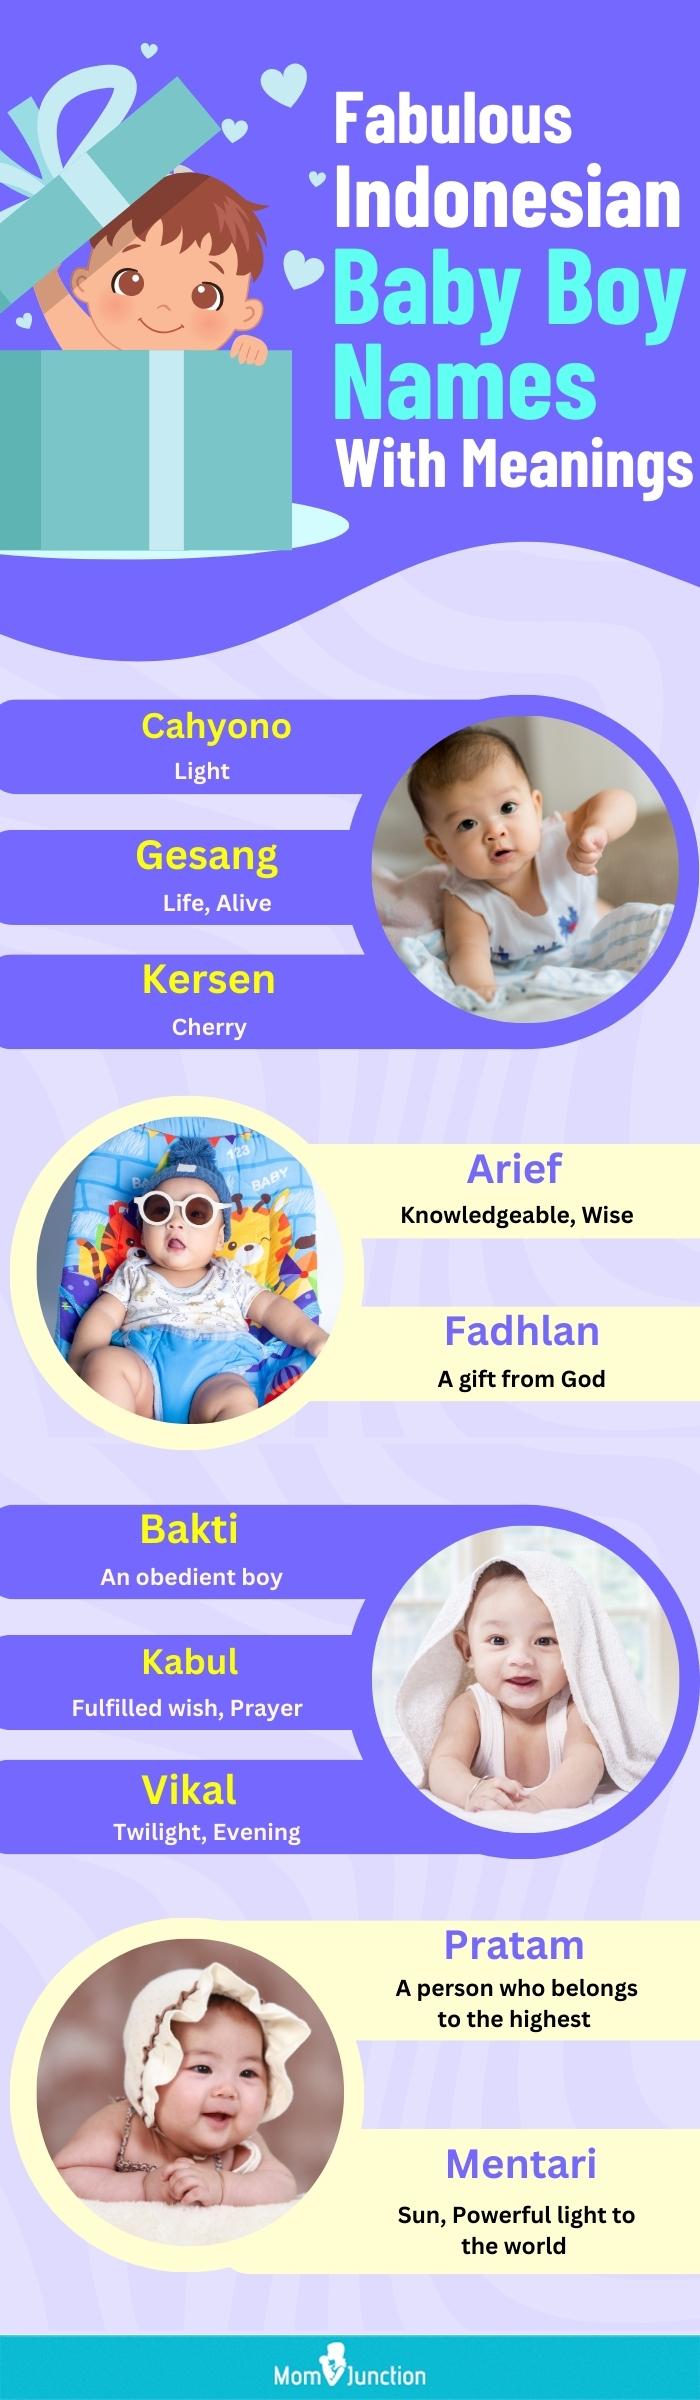 fabulous indonesian baby boy names with meanings (infographic)